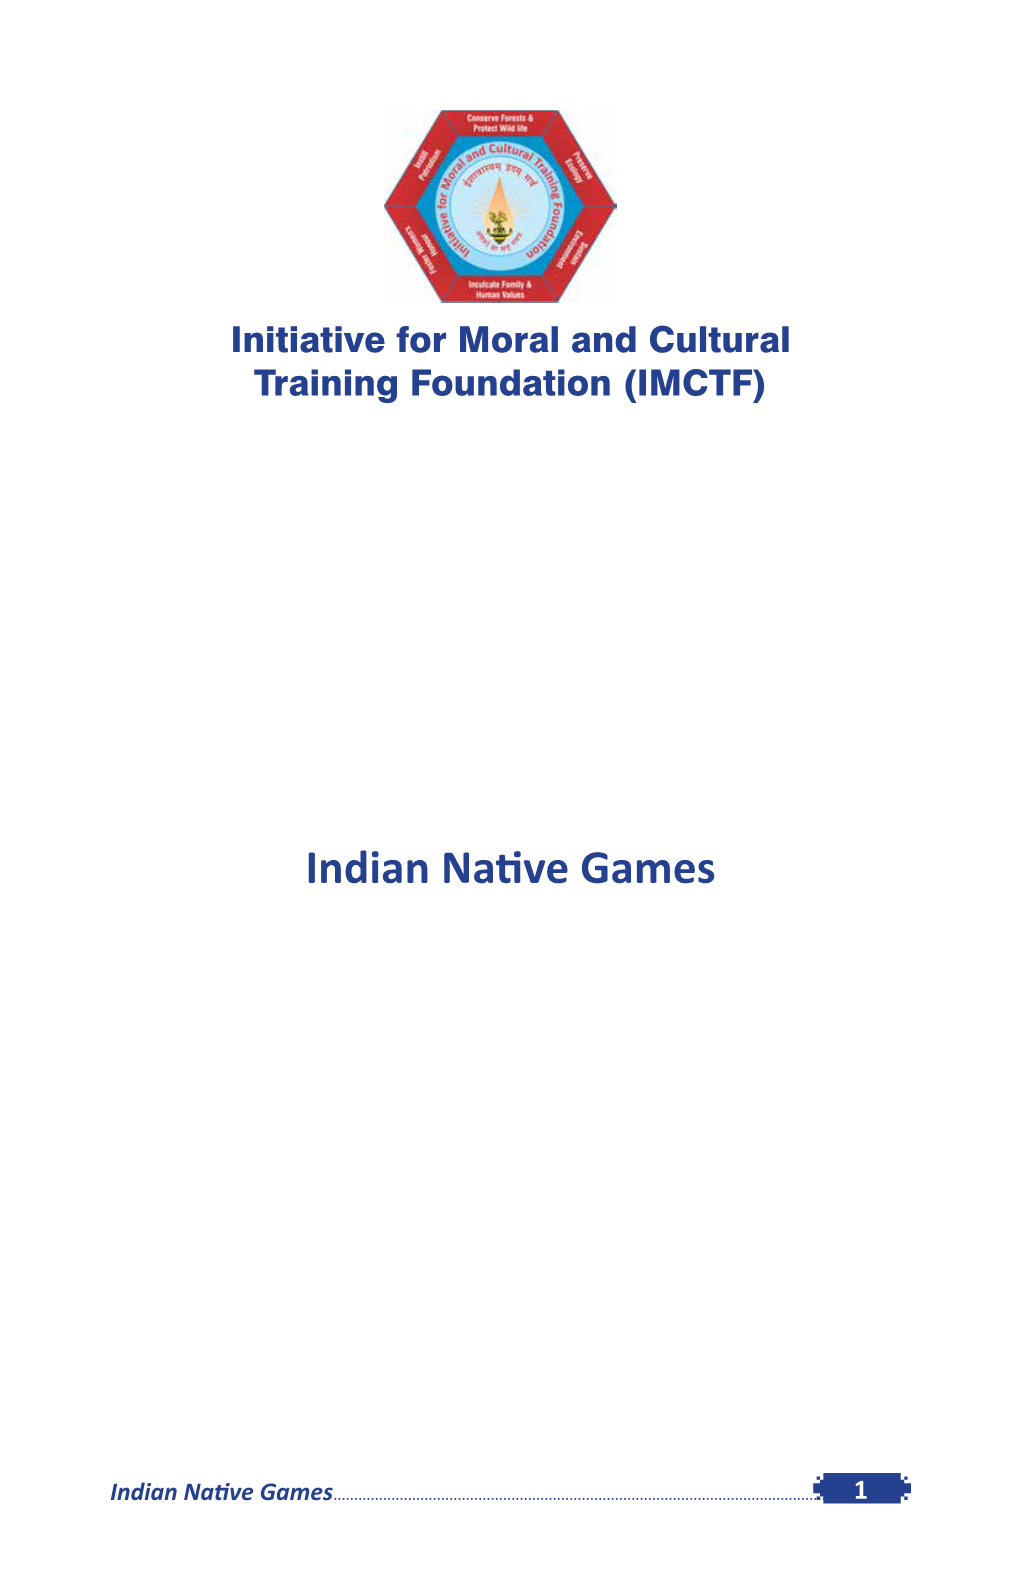 Indian Native Games